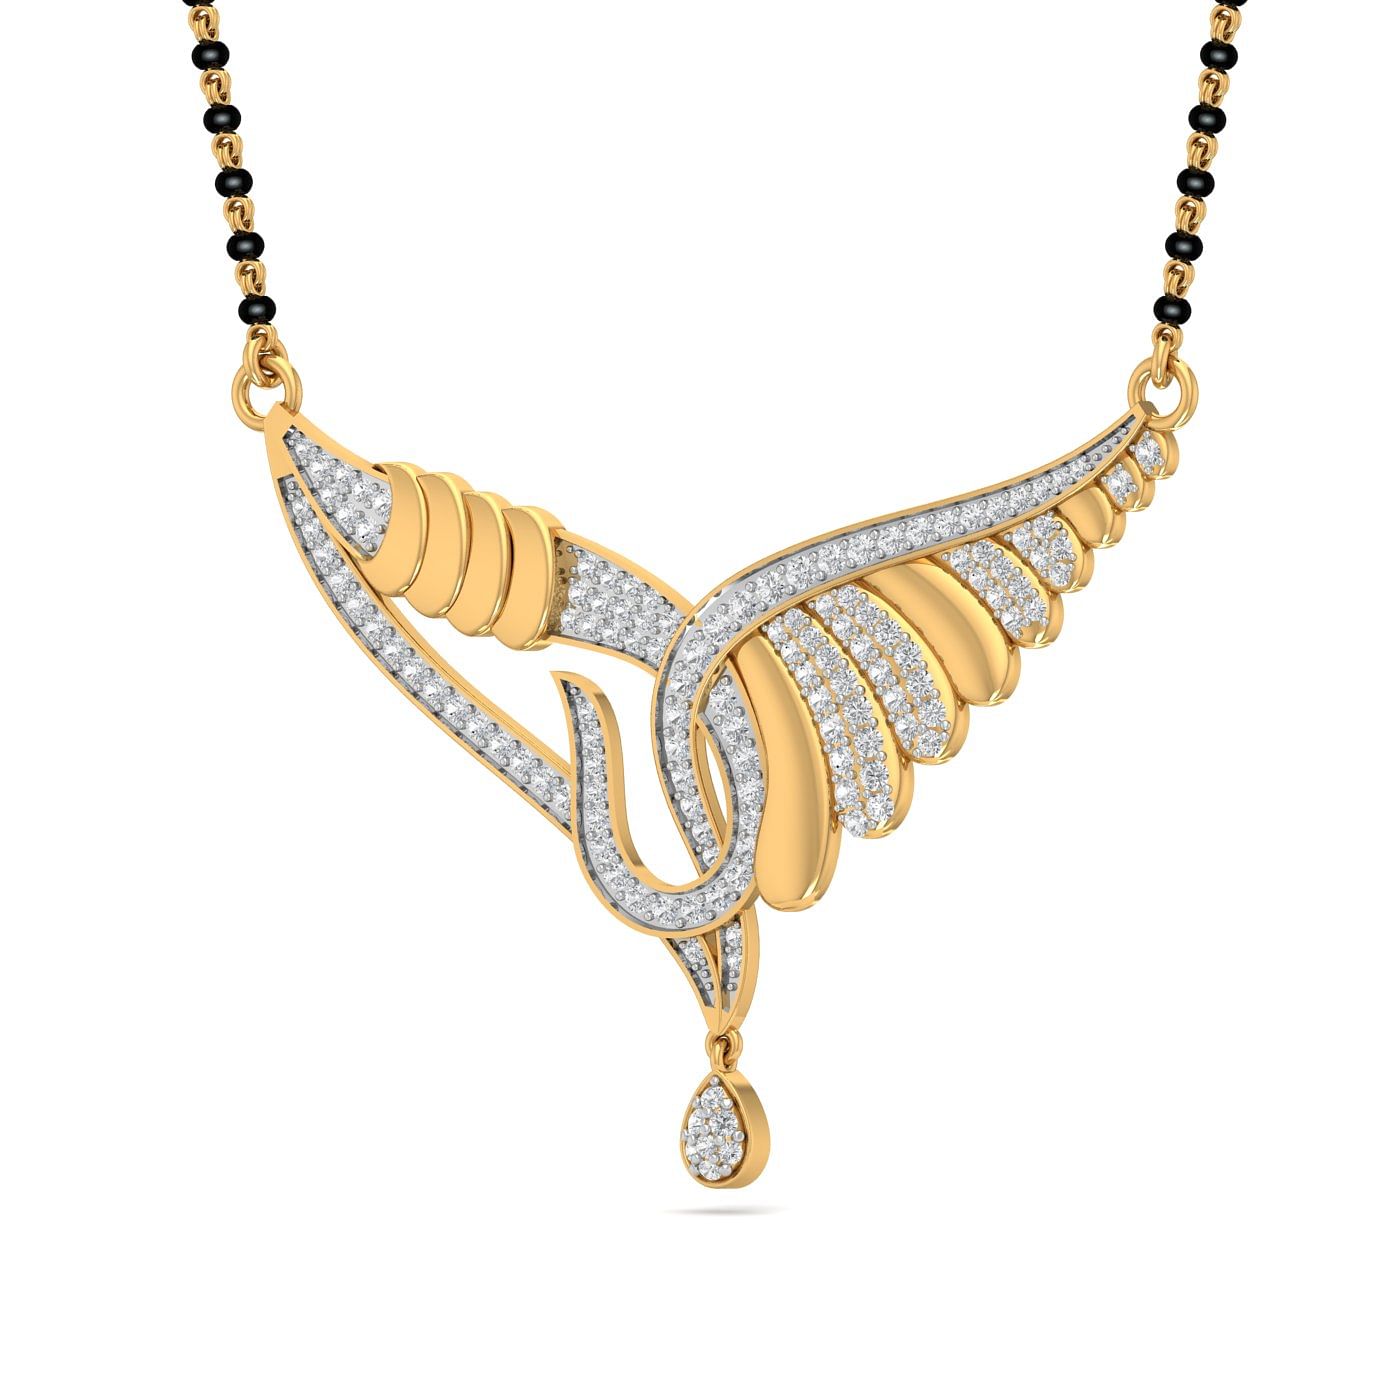 Hetal gold and diamond mangalsutra with yellow gold bridal